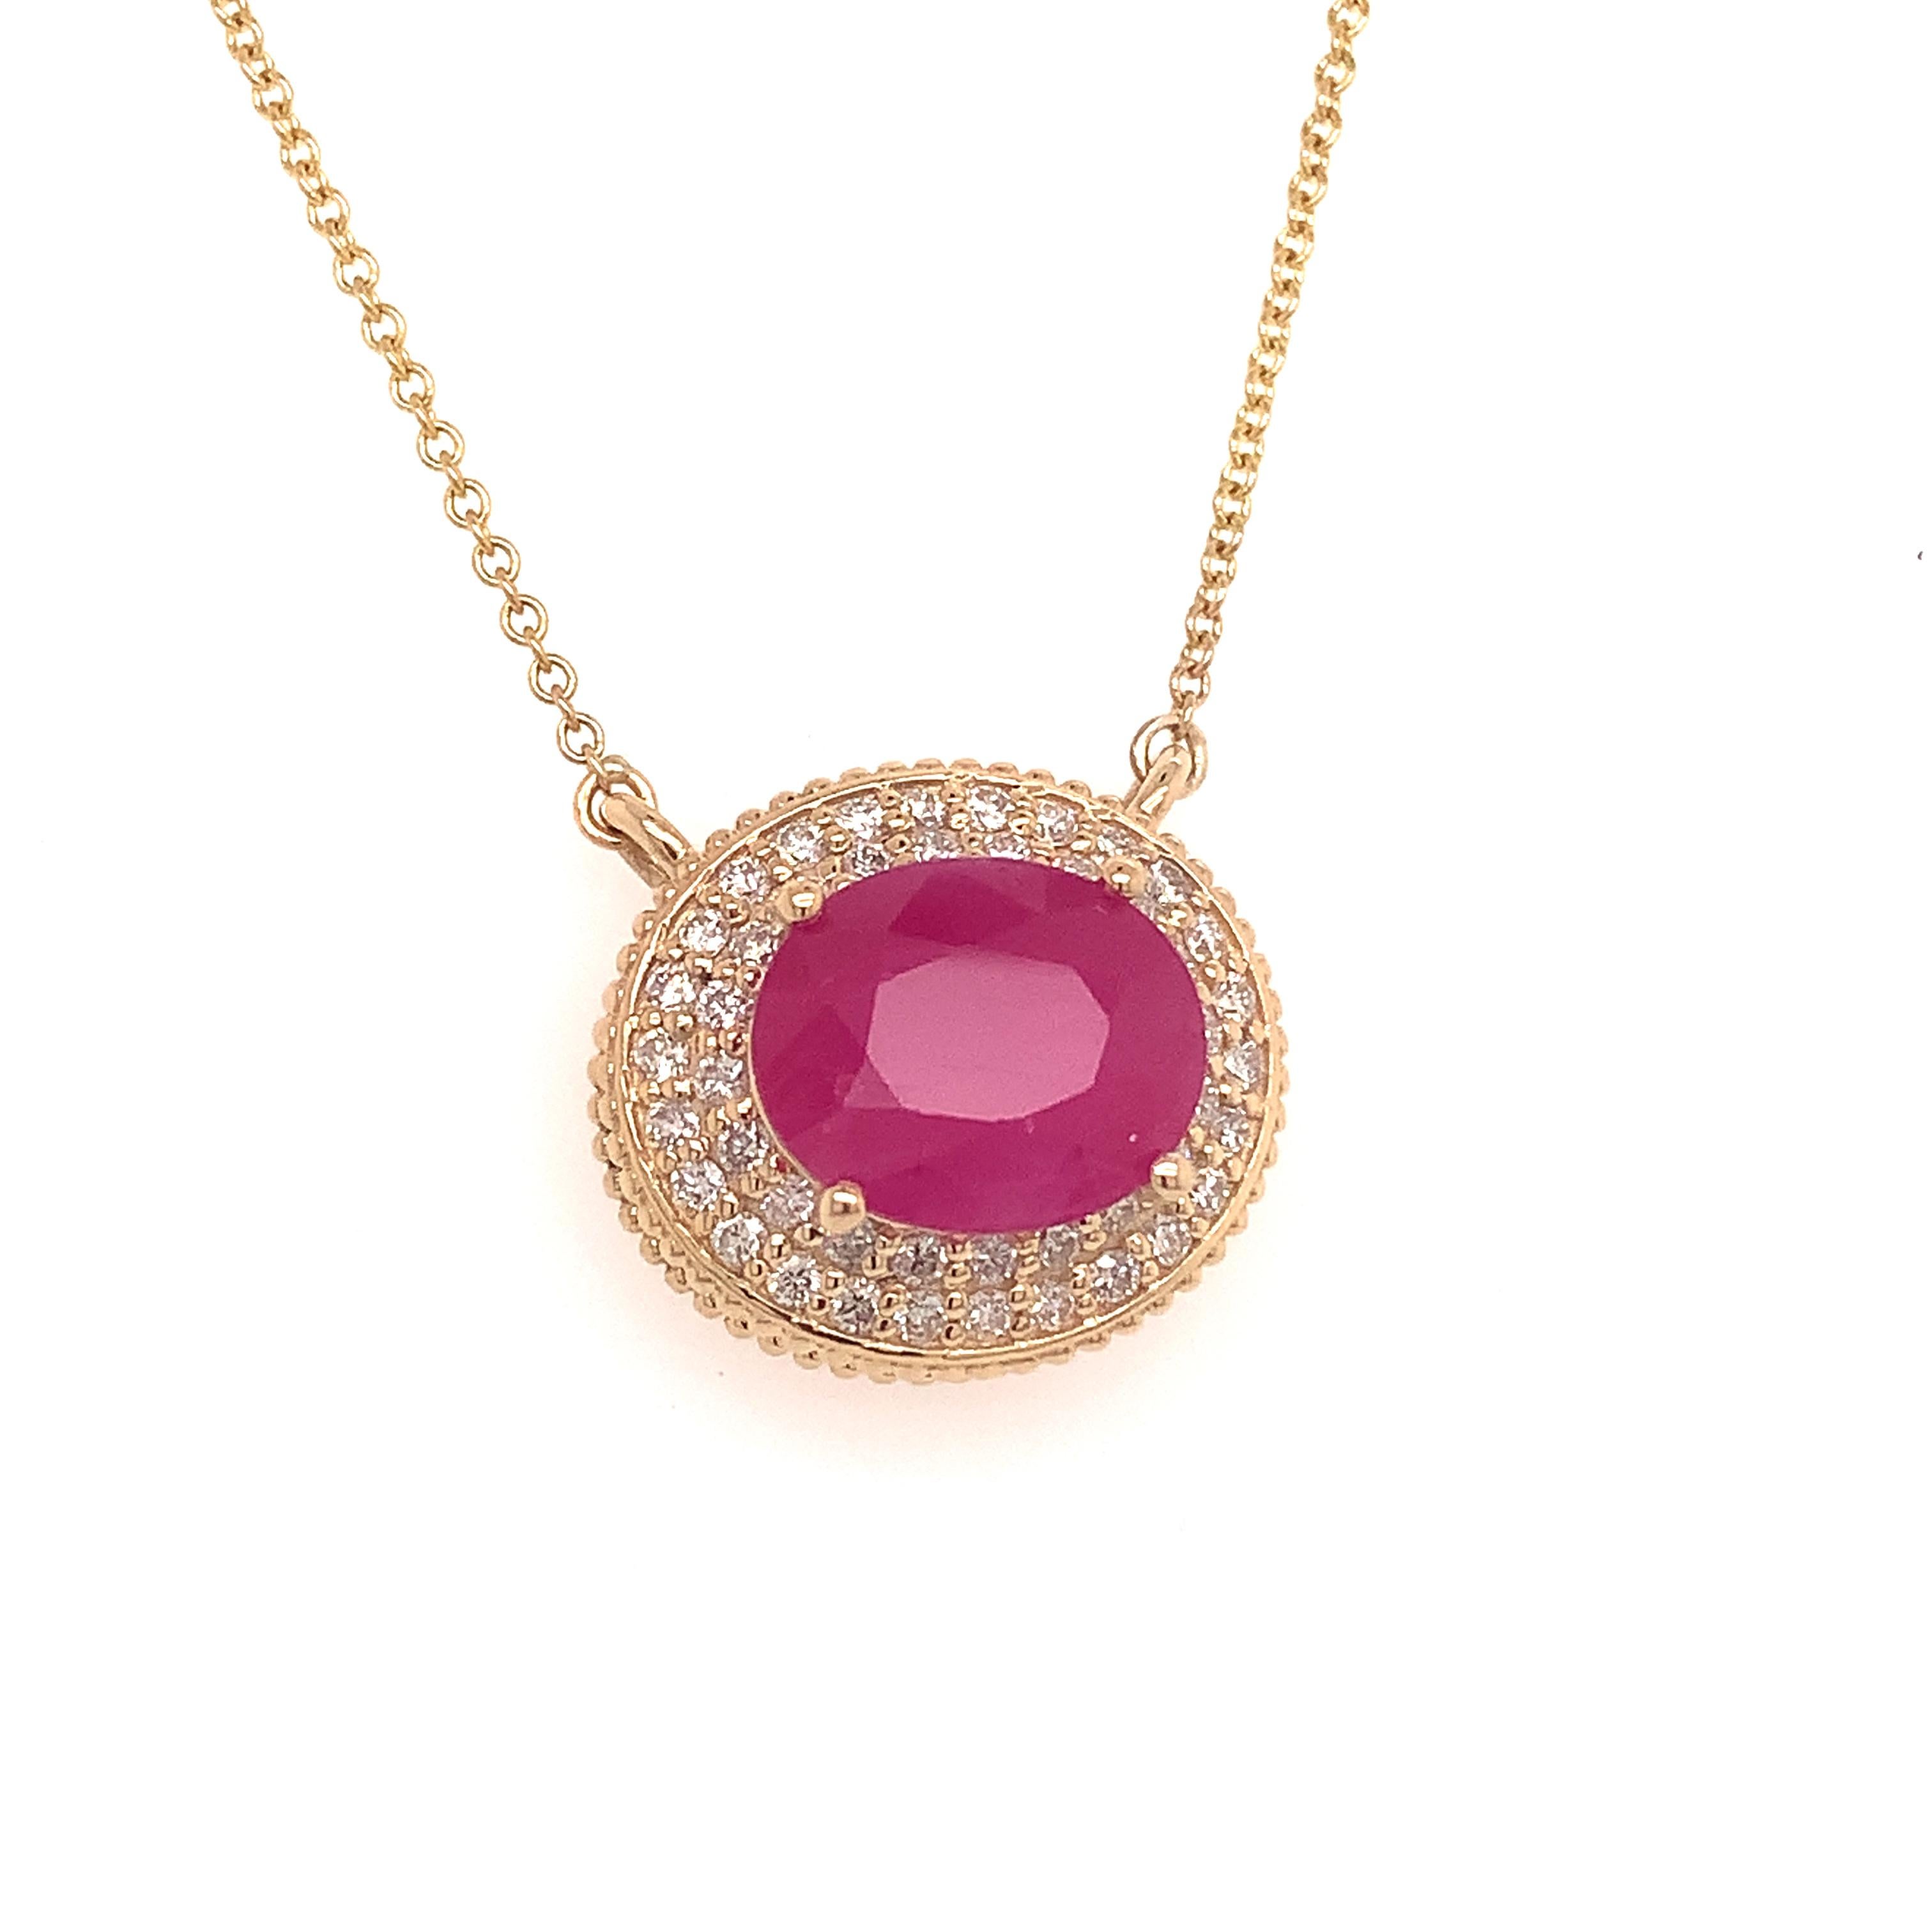 Natural Finely Faceted Quality Ruby Diamond Necklace 14k Gold 18